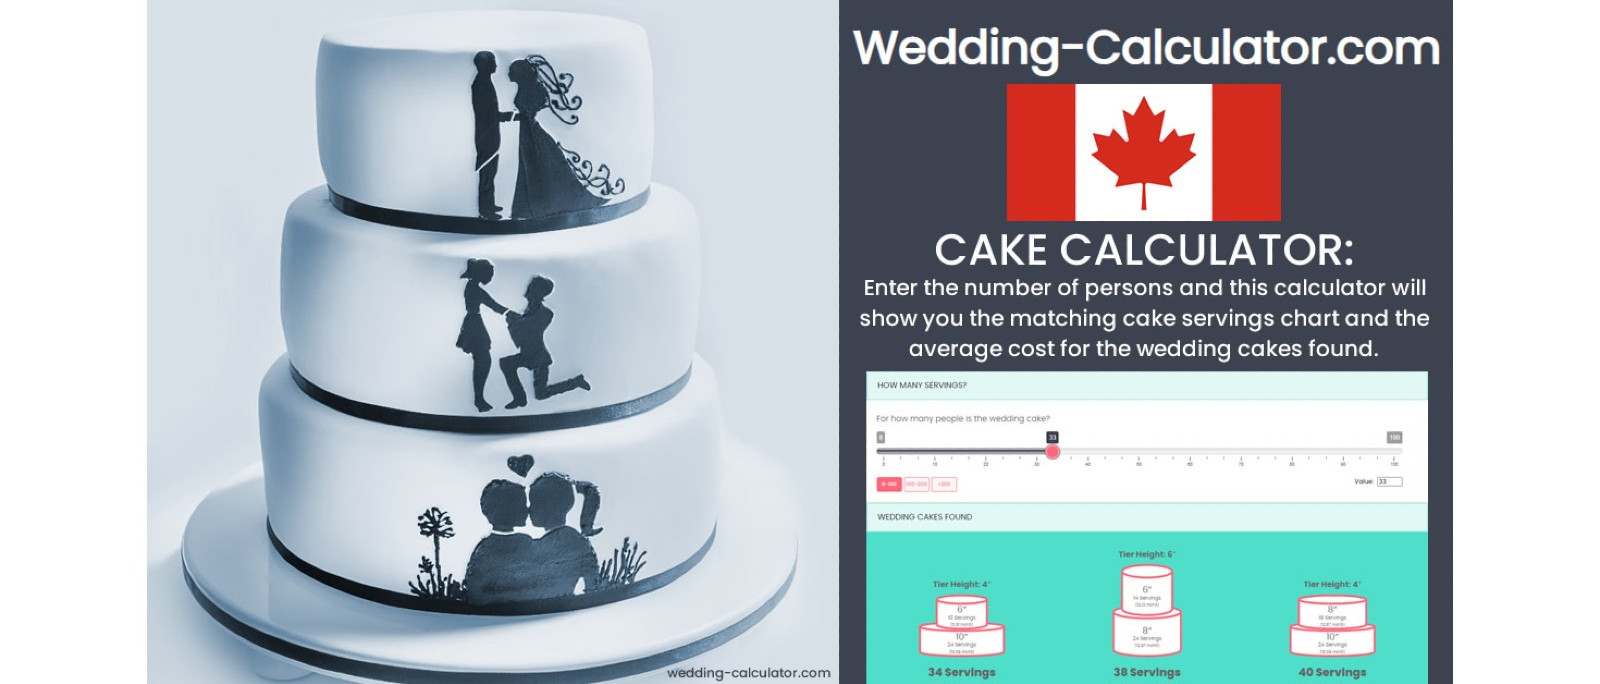 Want to see more wedding cakes? Use the wedding cake calculator